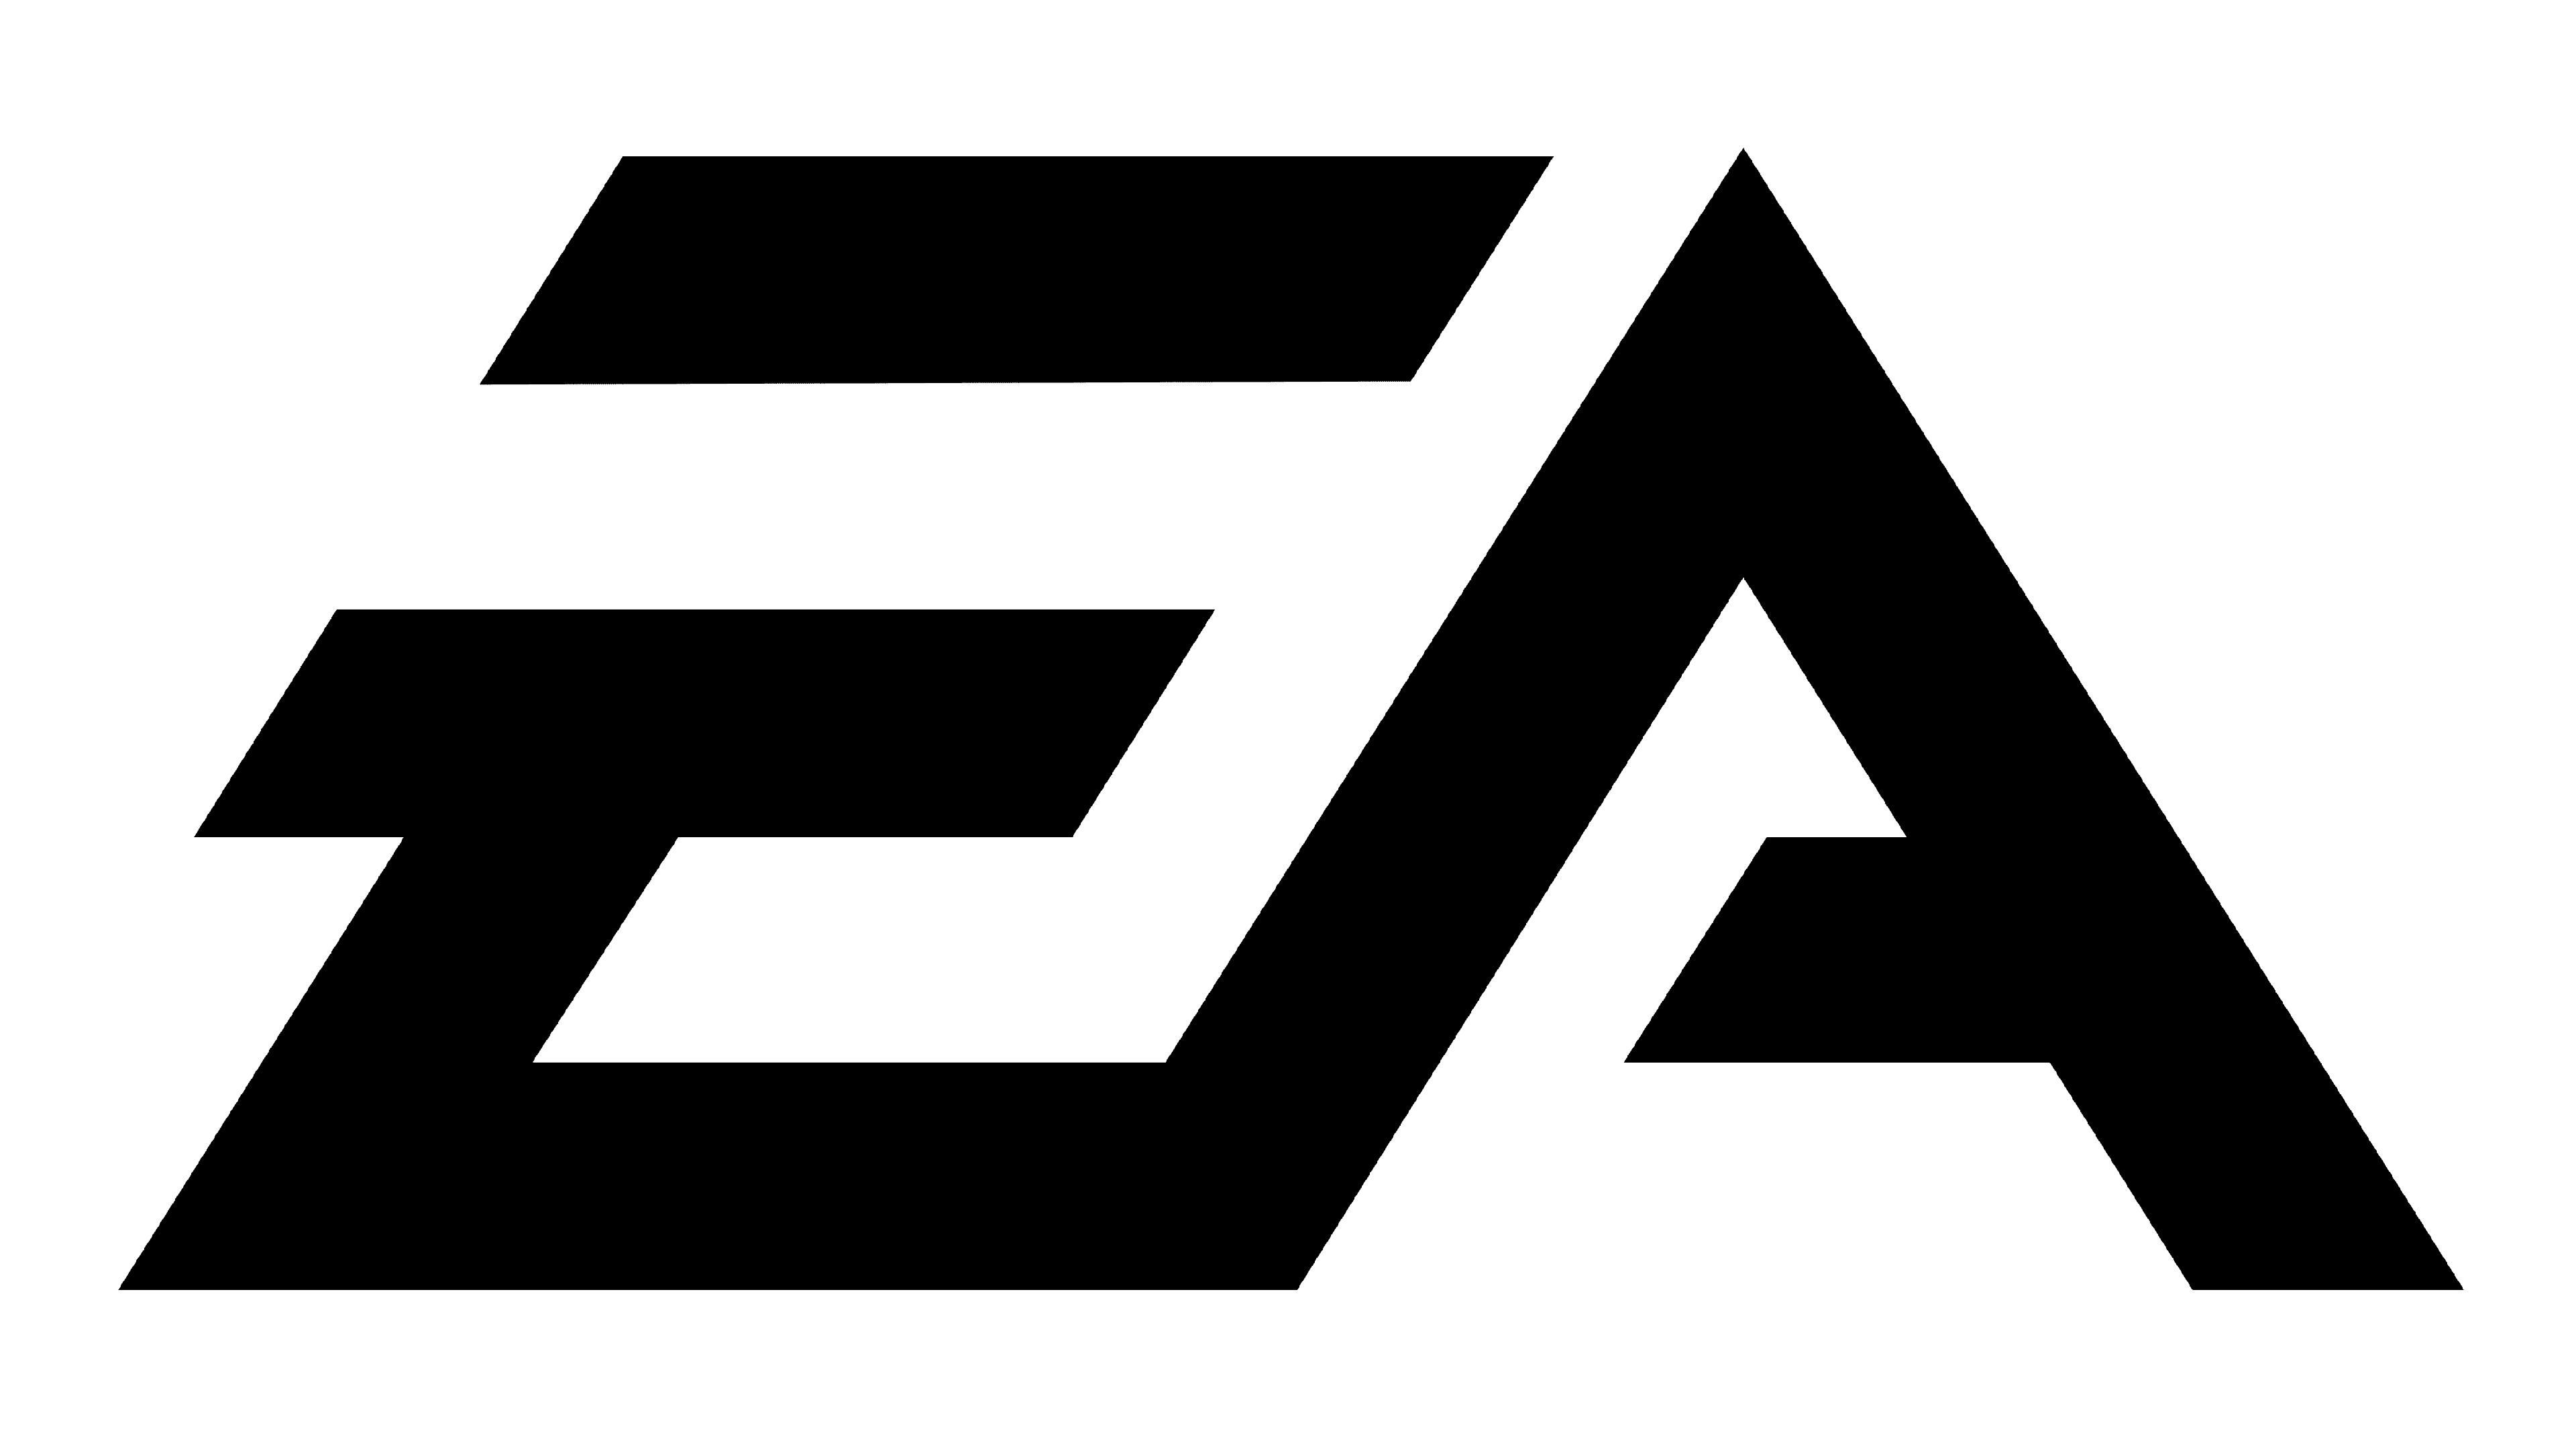 EA Games Logo and symbol, meaning, history, PNG